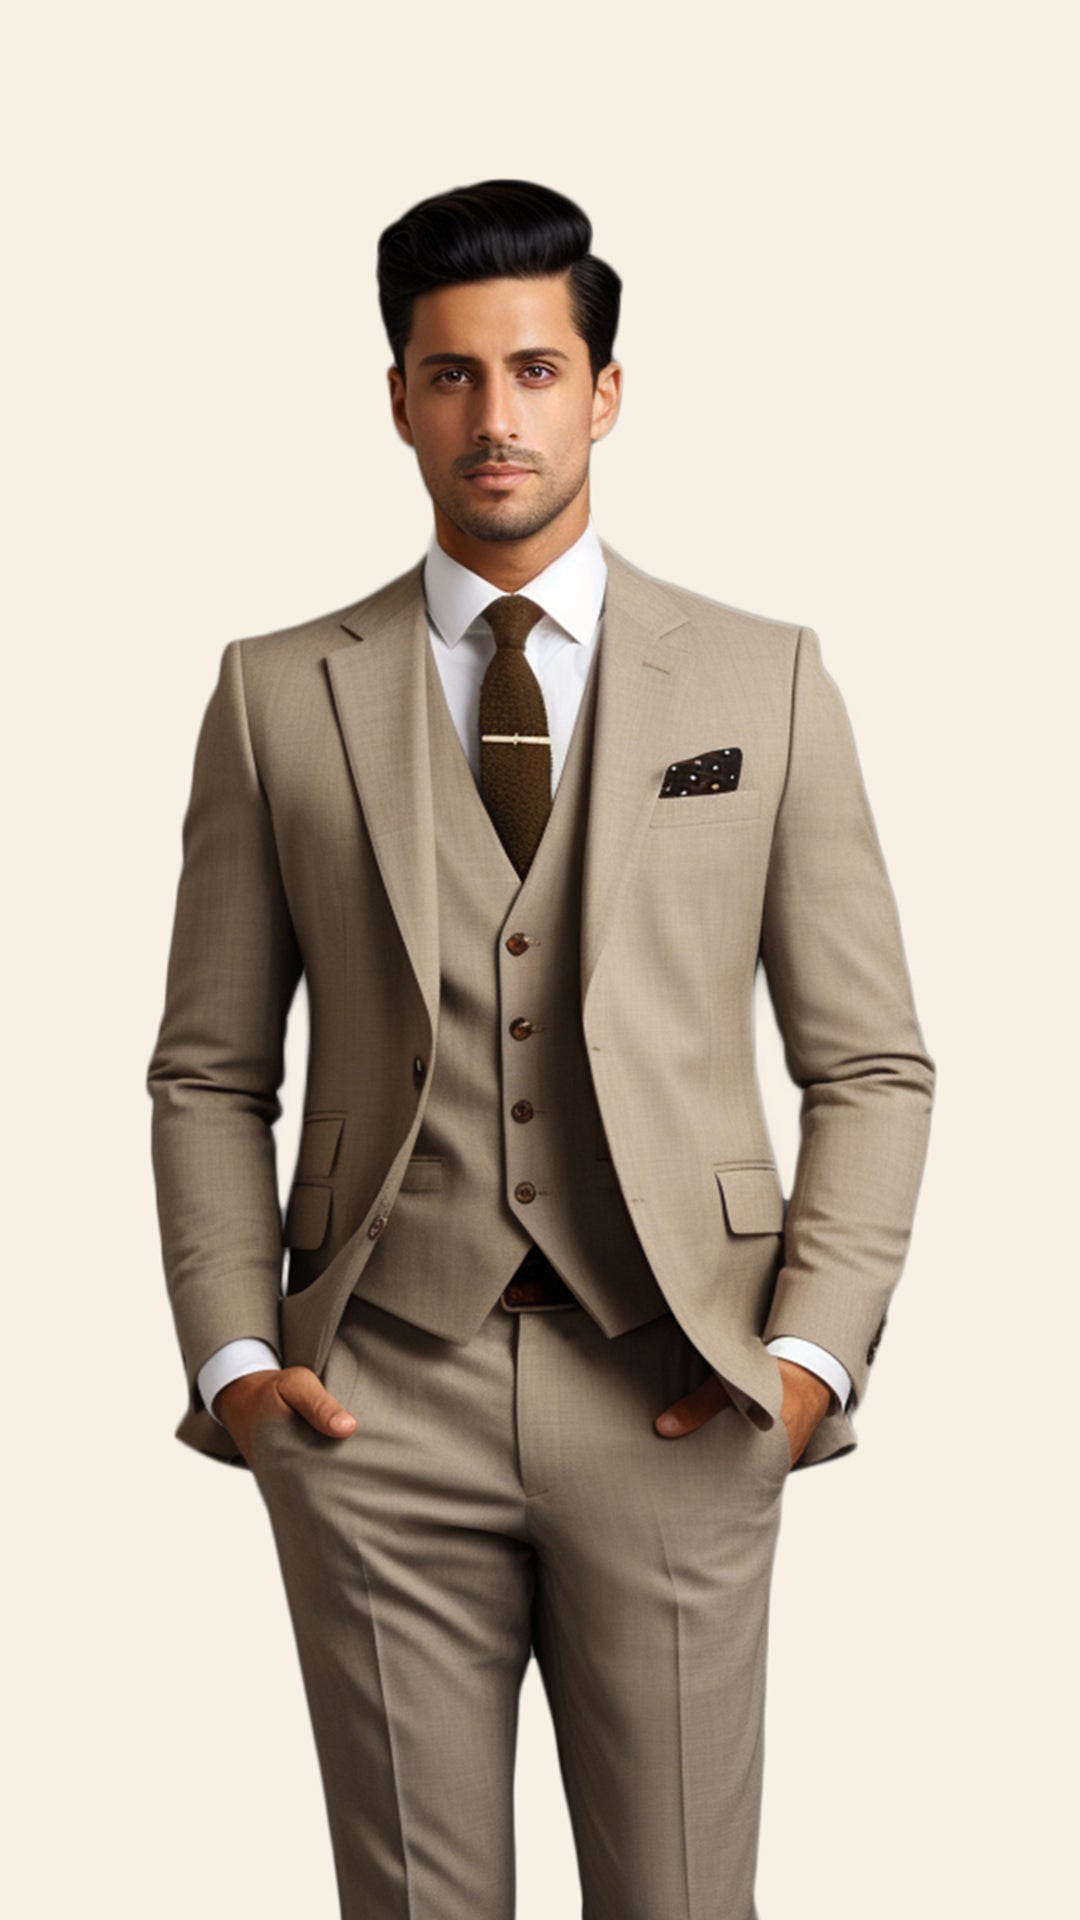 Bespoke Men's Three-Piece Beige Suit in Light Shade - Crafted in Terry Rayon by BWO